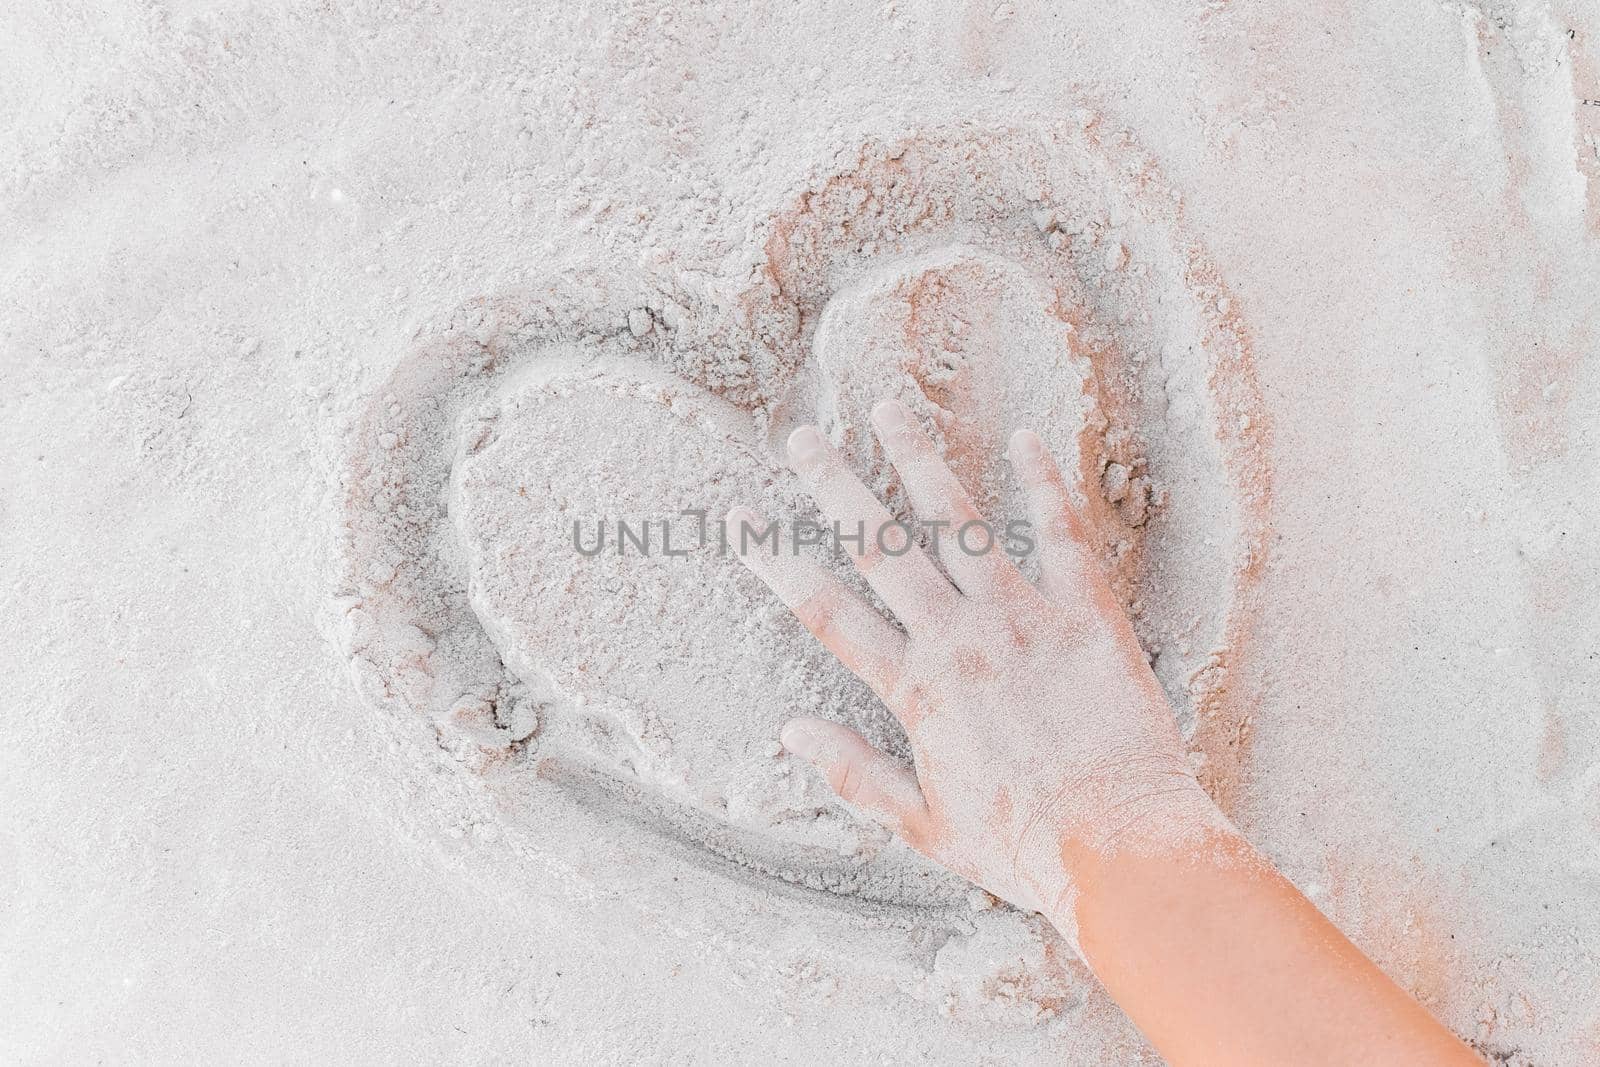 The hand of a young girl touches a picture of a heart on a white beach sand close-up. Sign and symbol of love and relationship concept.